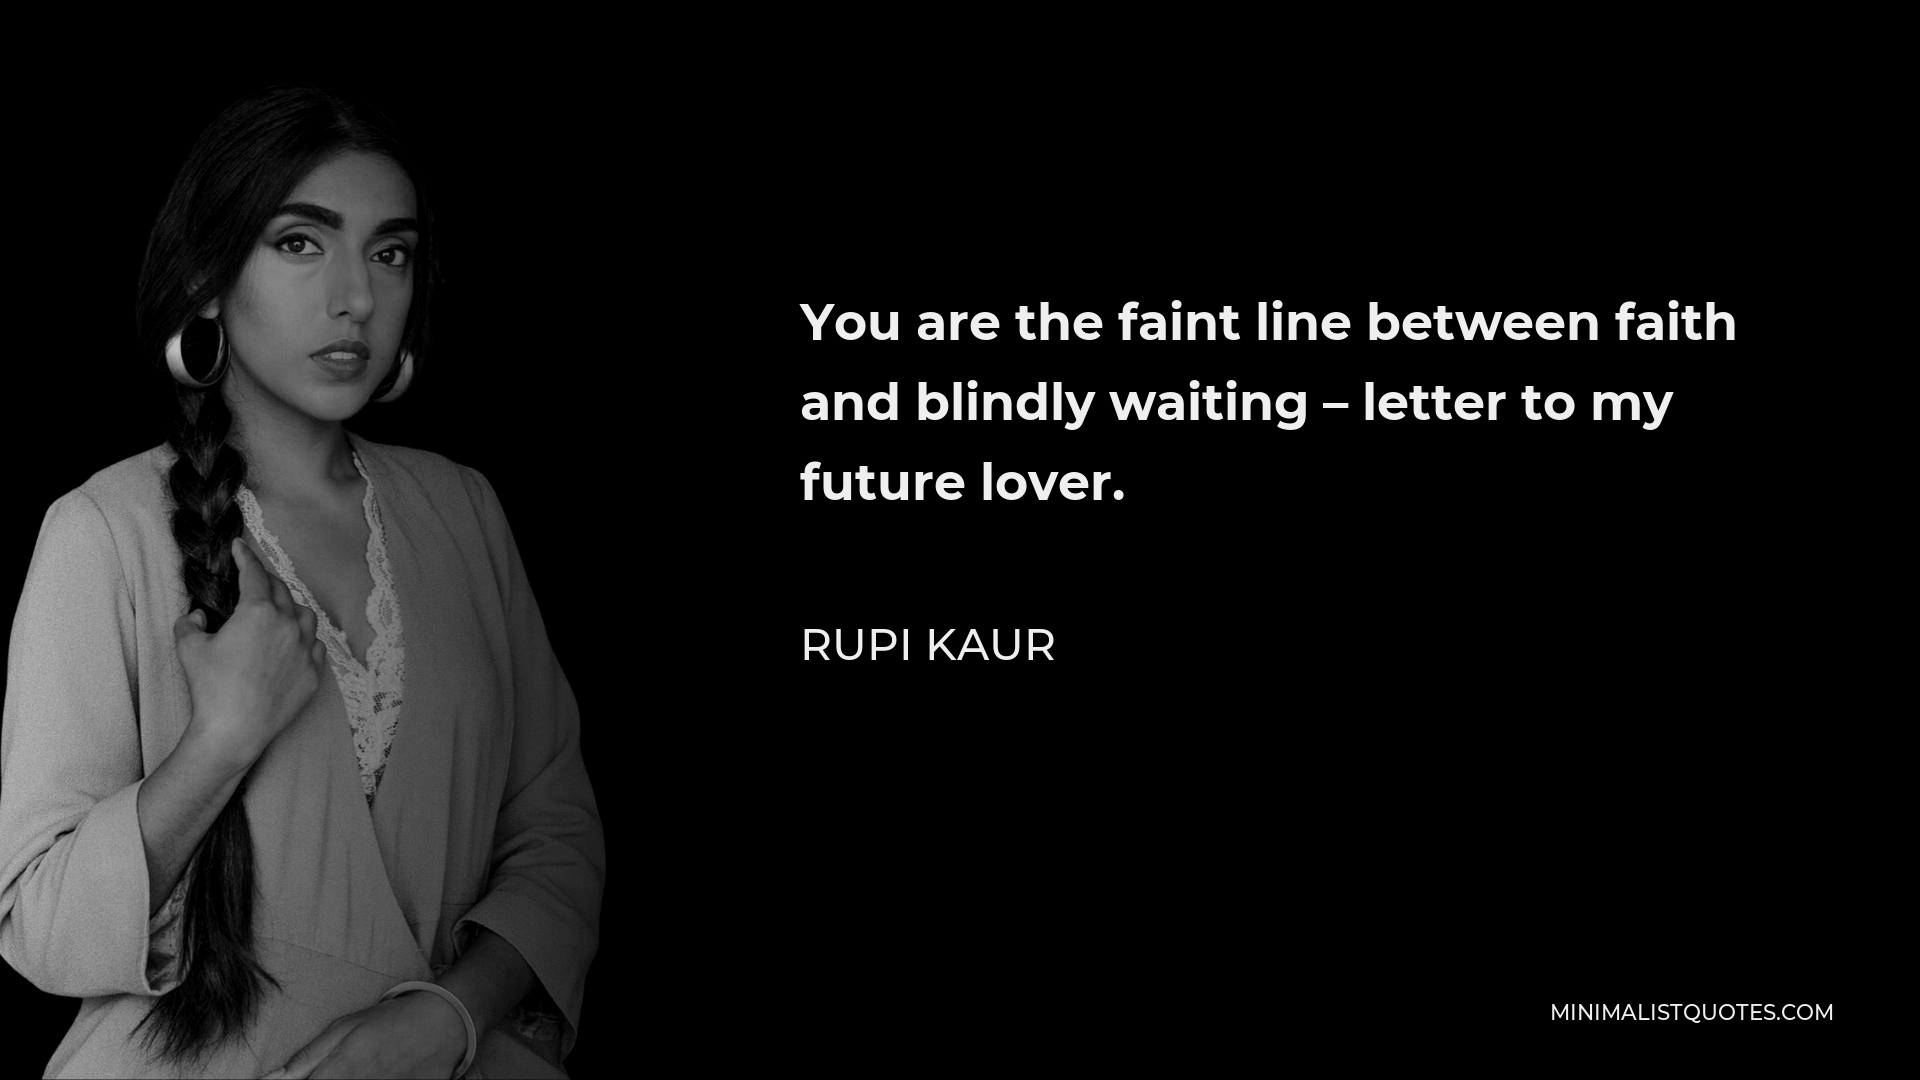 Rupi Kaur Quote - You are the faint line between faith and blindly waiting – letter to my future lover.